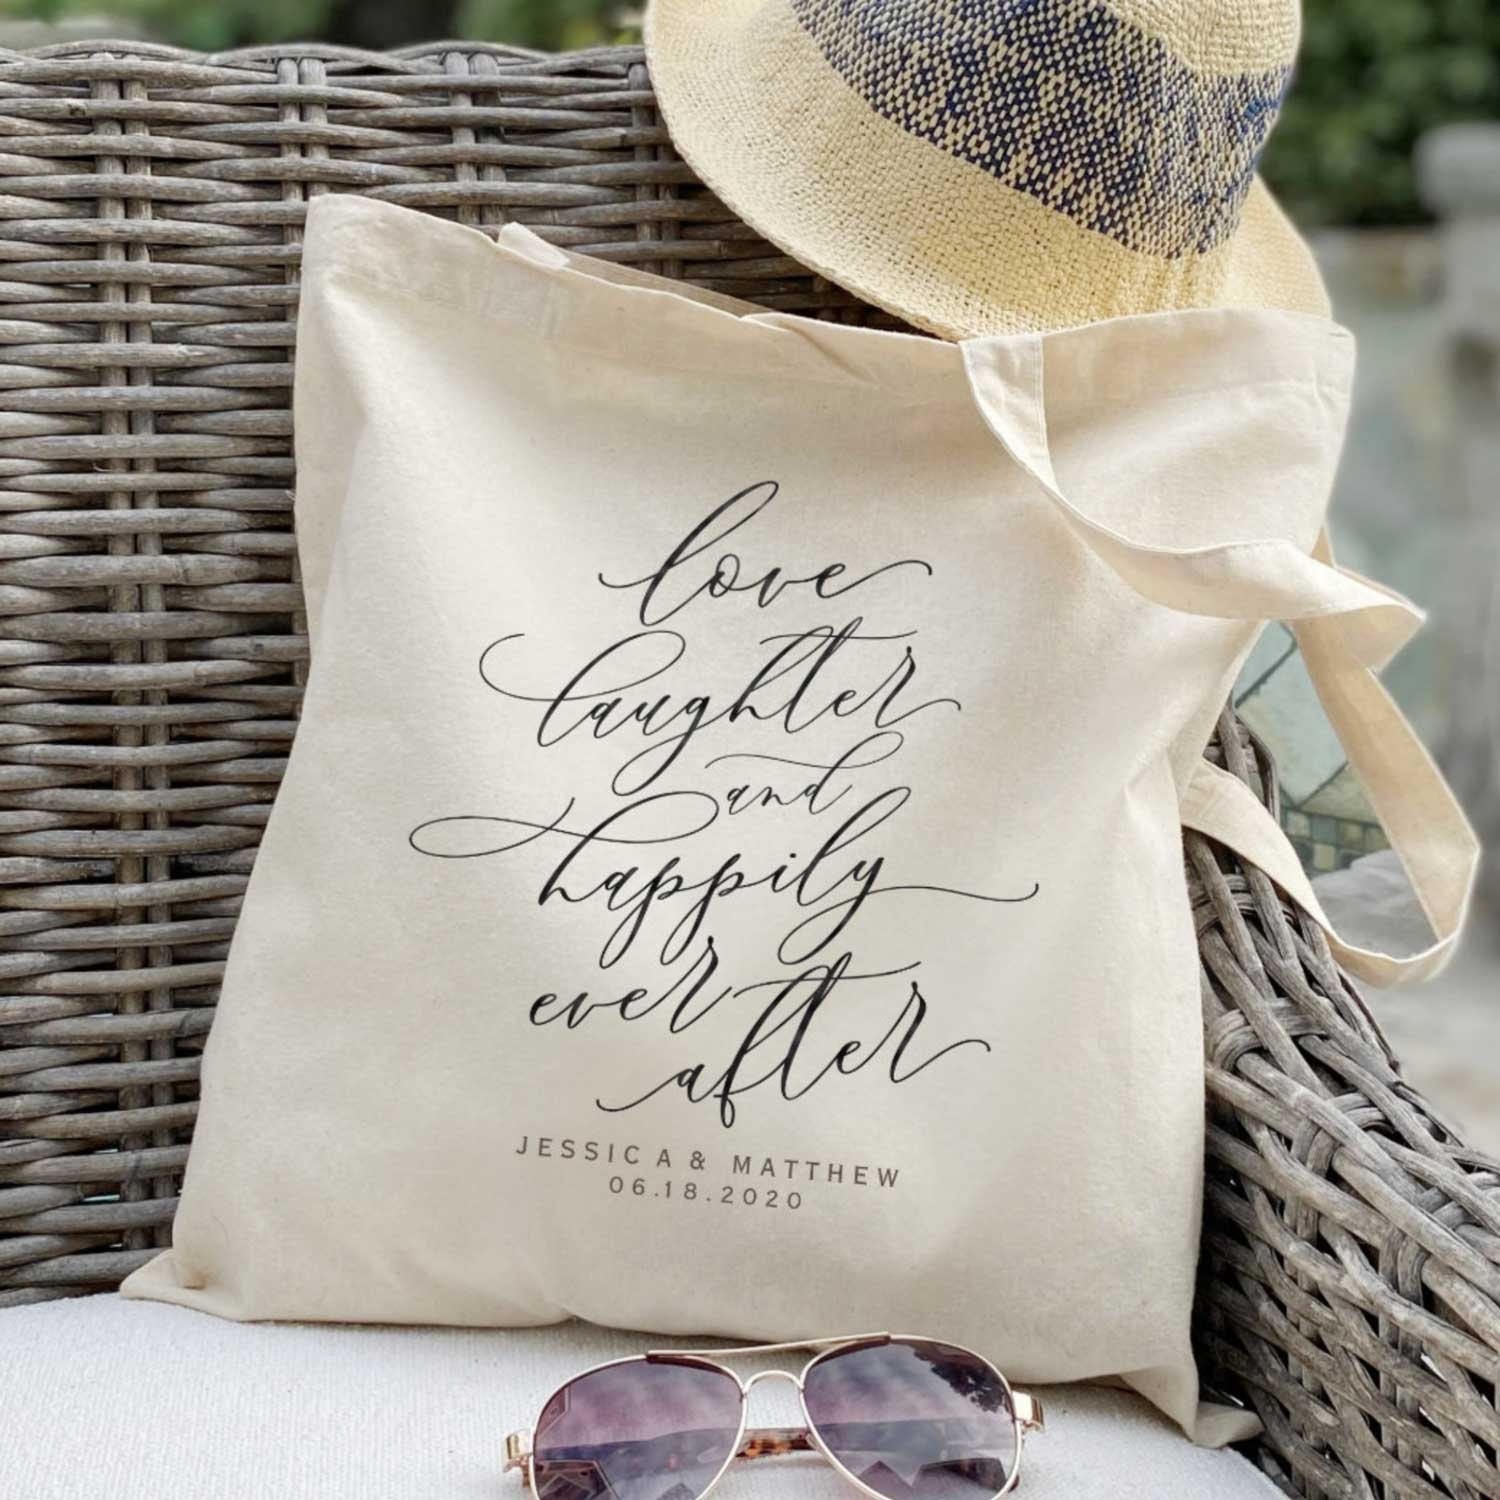 Hotel guest tote bag